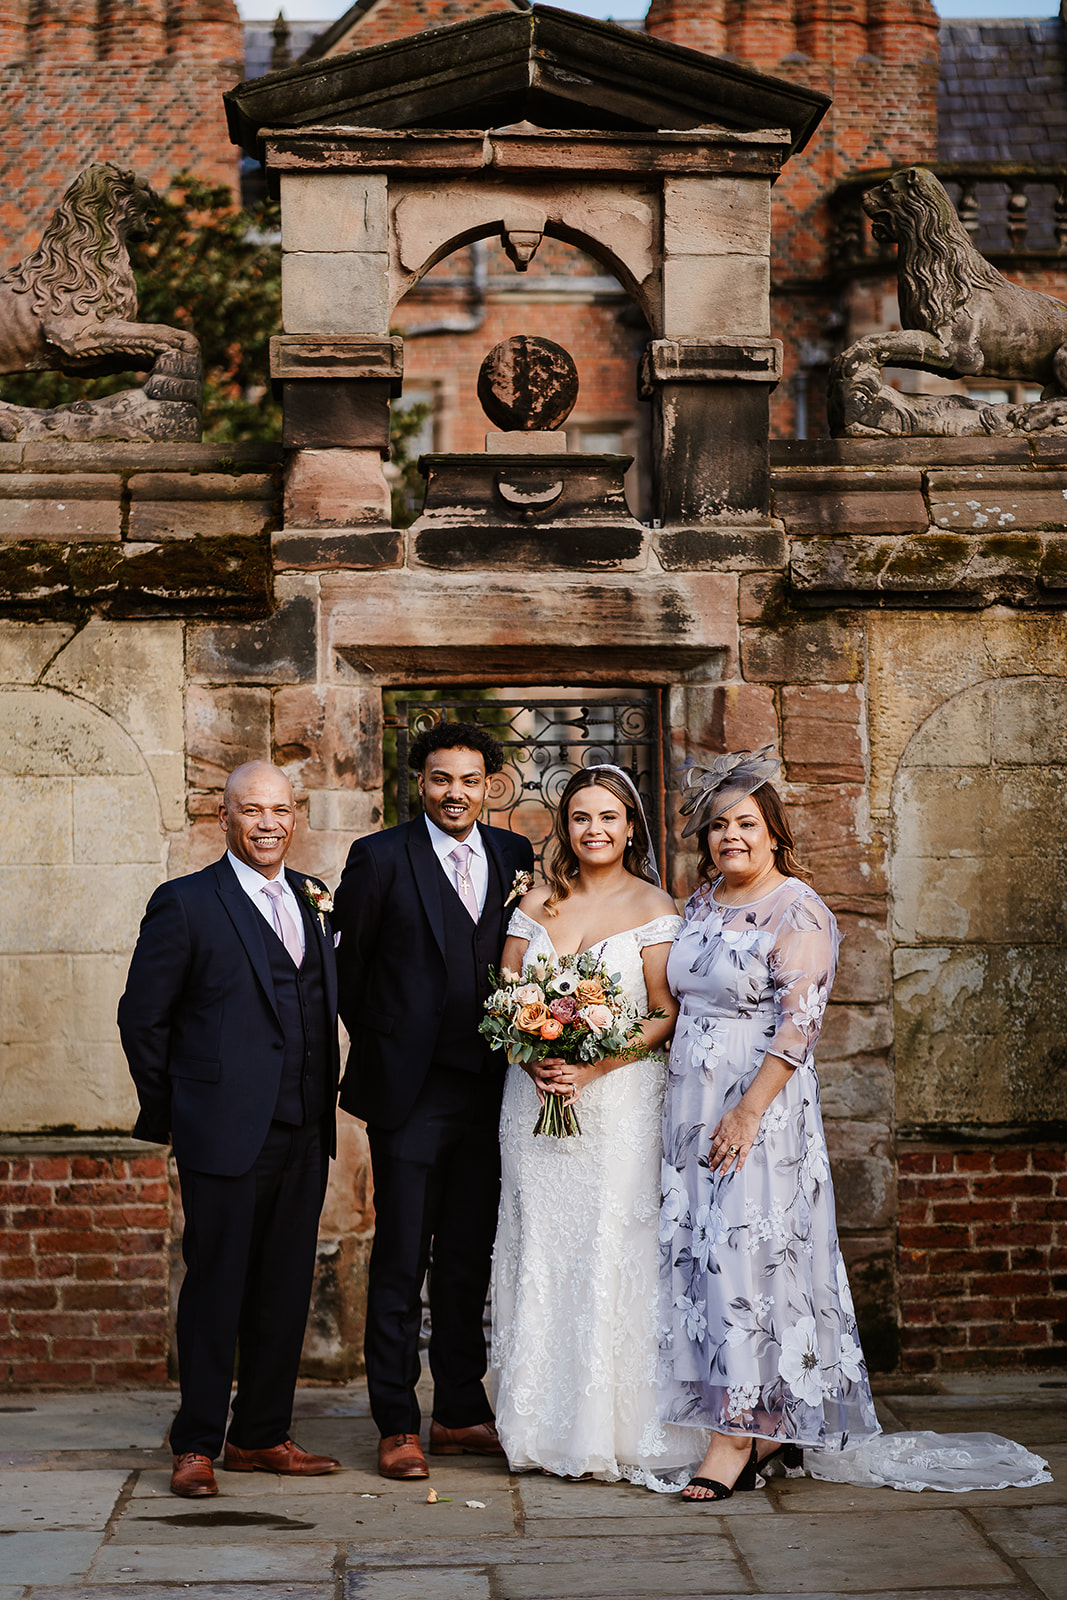 Bride and family pose in front of ornate gate